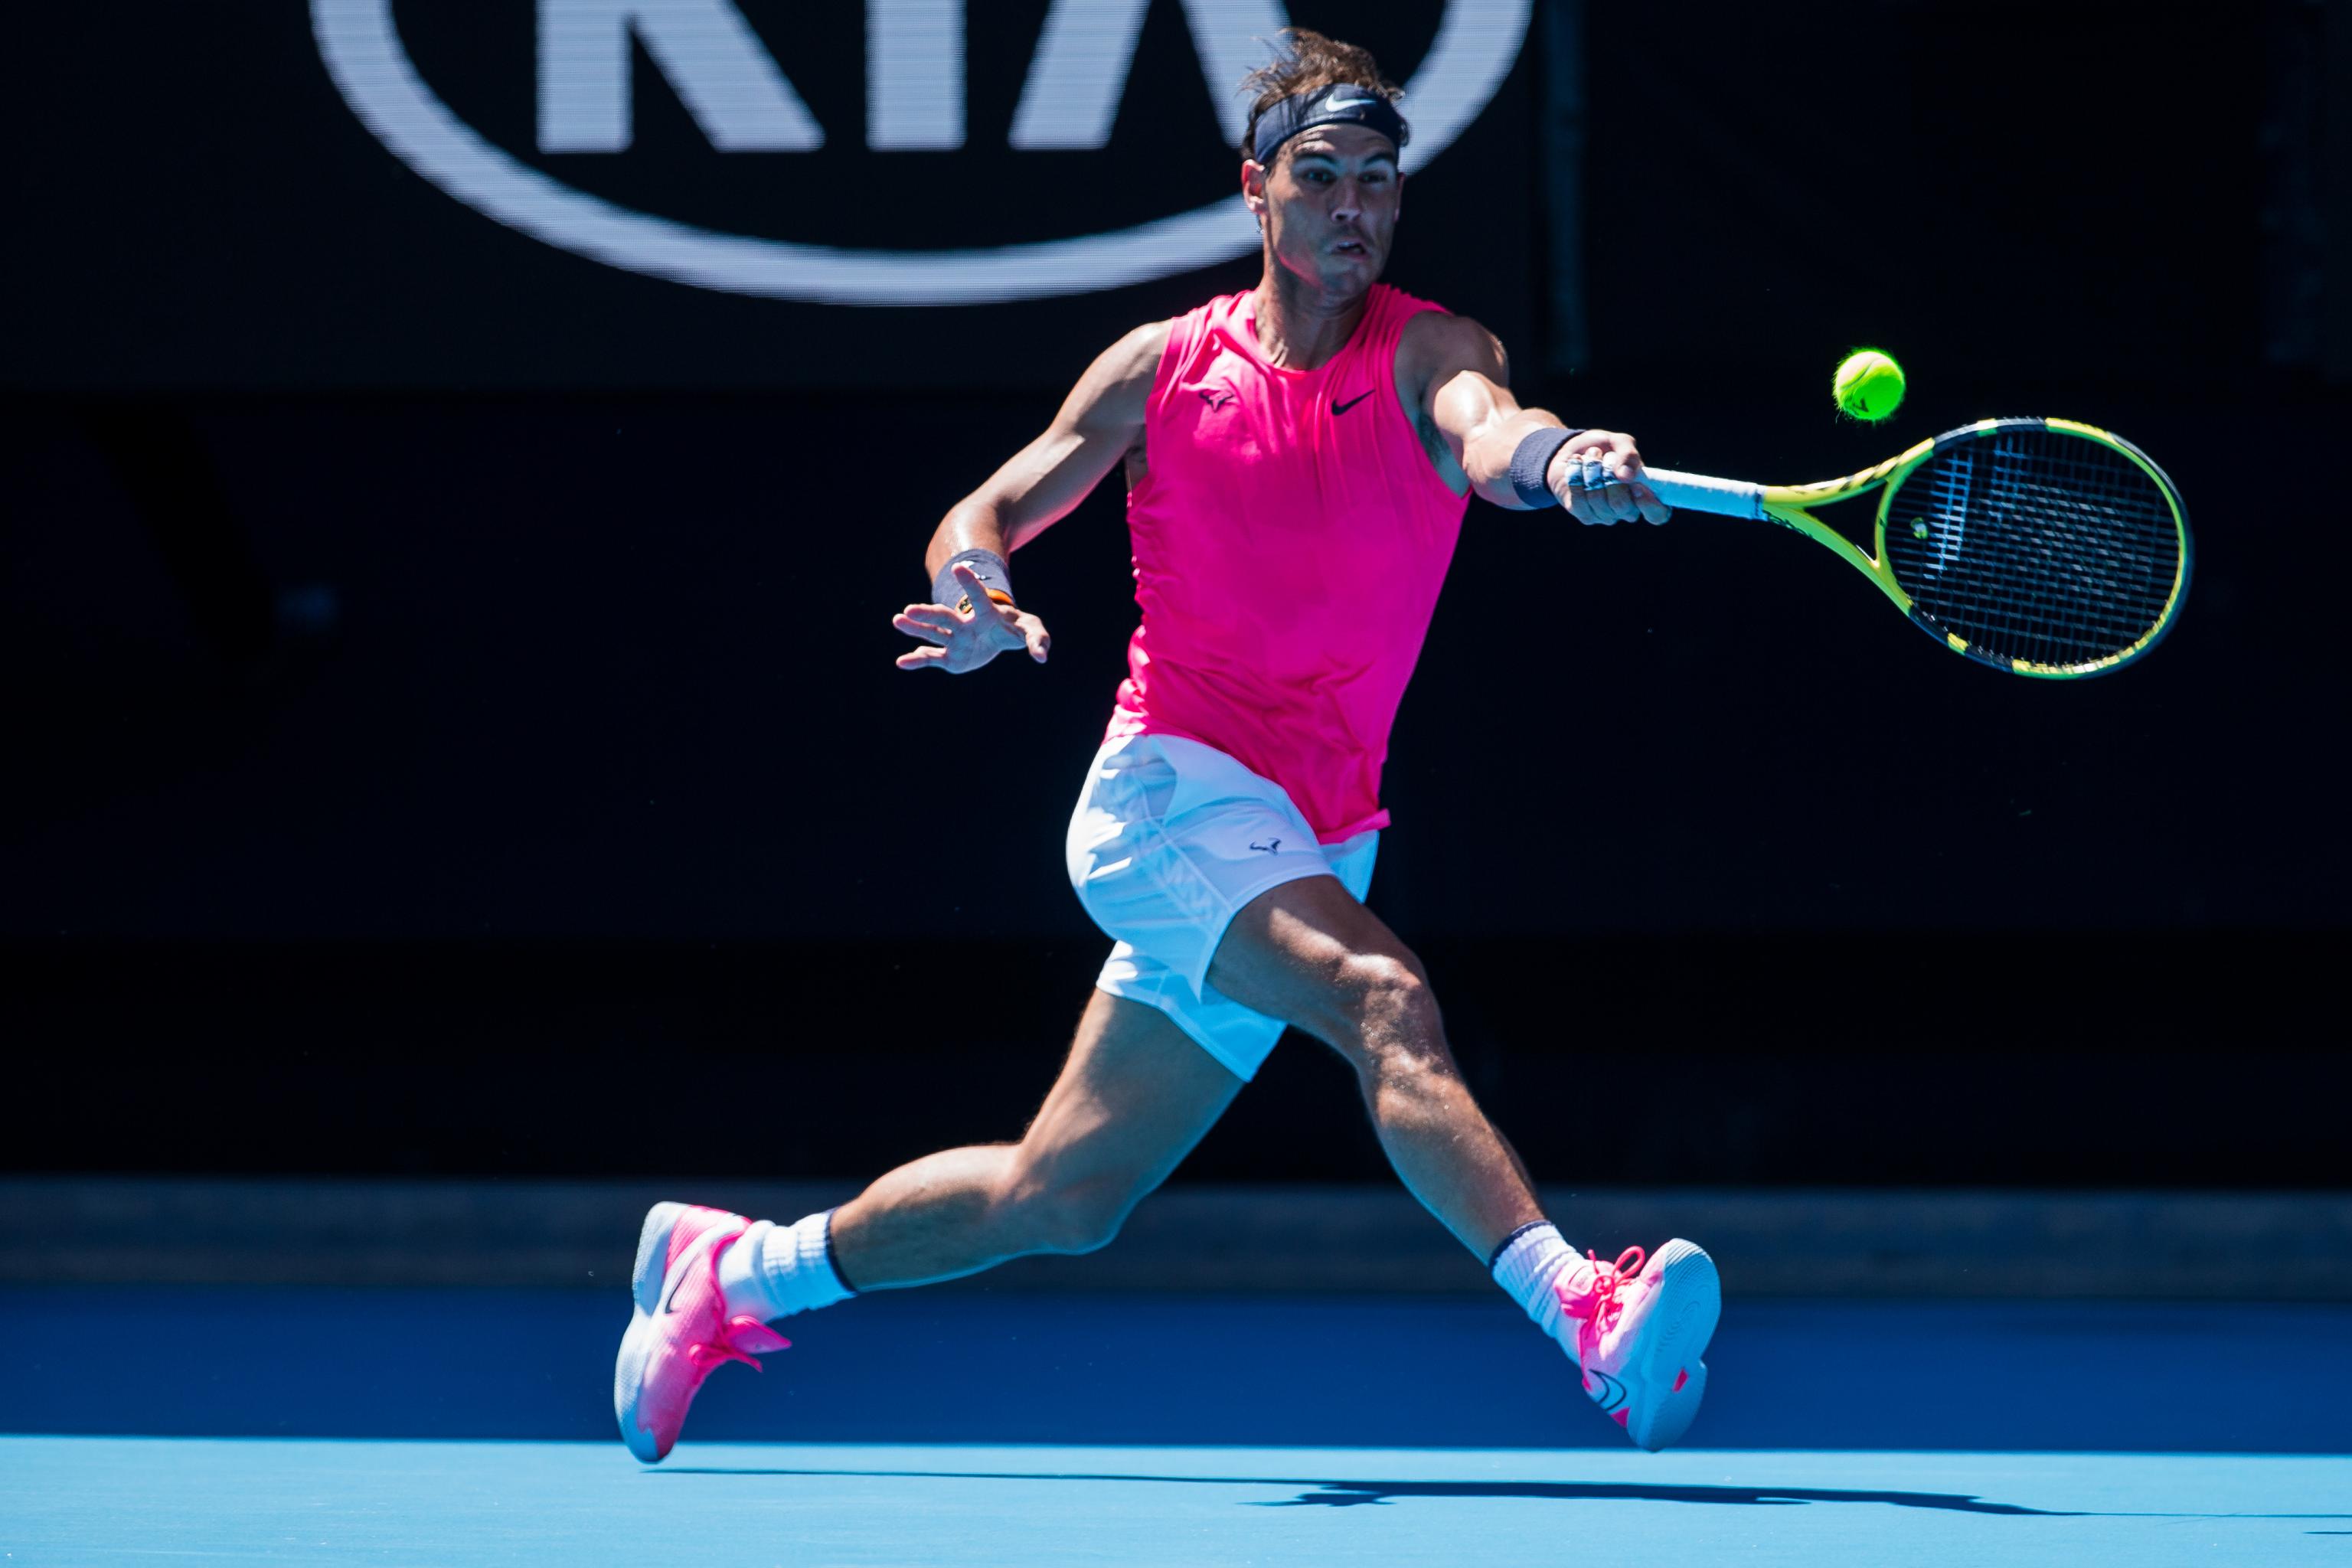 Australian Open 2020 Results: Rafael Nadal and from Tuesday's Bracket | Bleacher | Latest News, Videos and Highlights